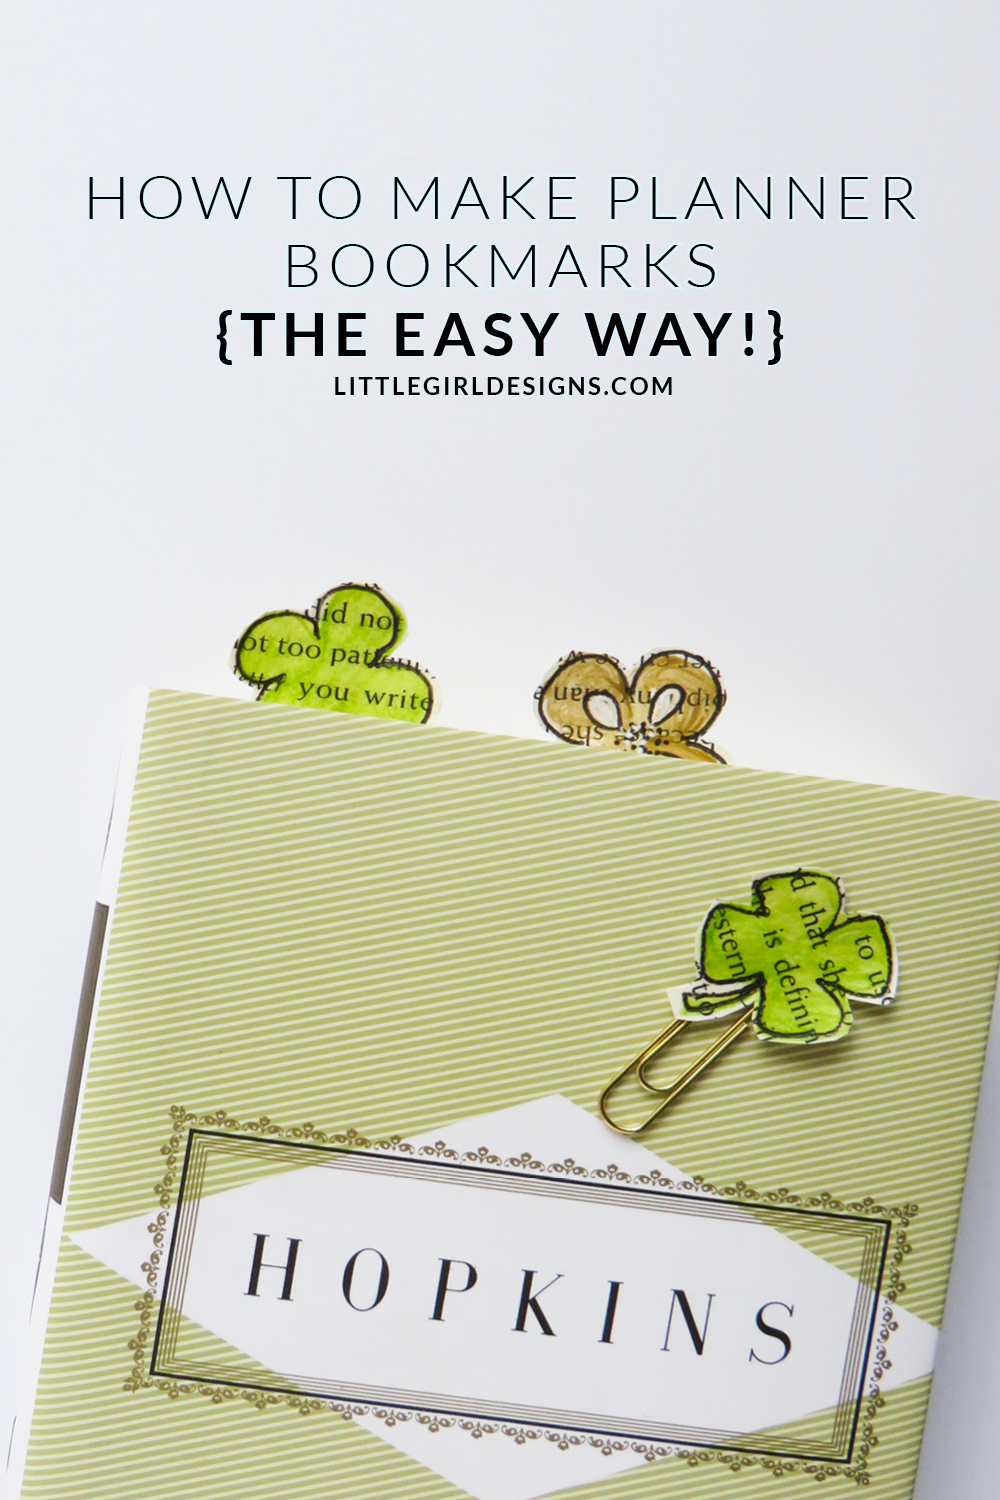 How to Make Planner Bookmarks (The Easy Way) - If you're a planner girl, you know what I'm talking about when I mention planner bookmarks. They're everywhere these days. But did you know that you could easily whip up a batch that are uniquely you with supplies you already have on hand? Let me show you how! :)